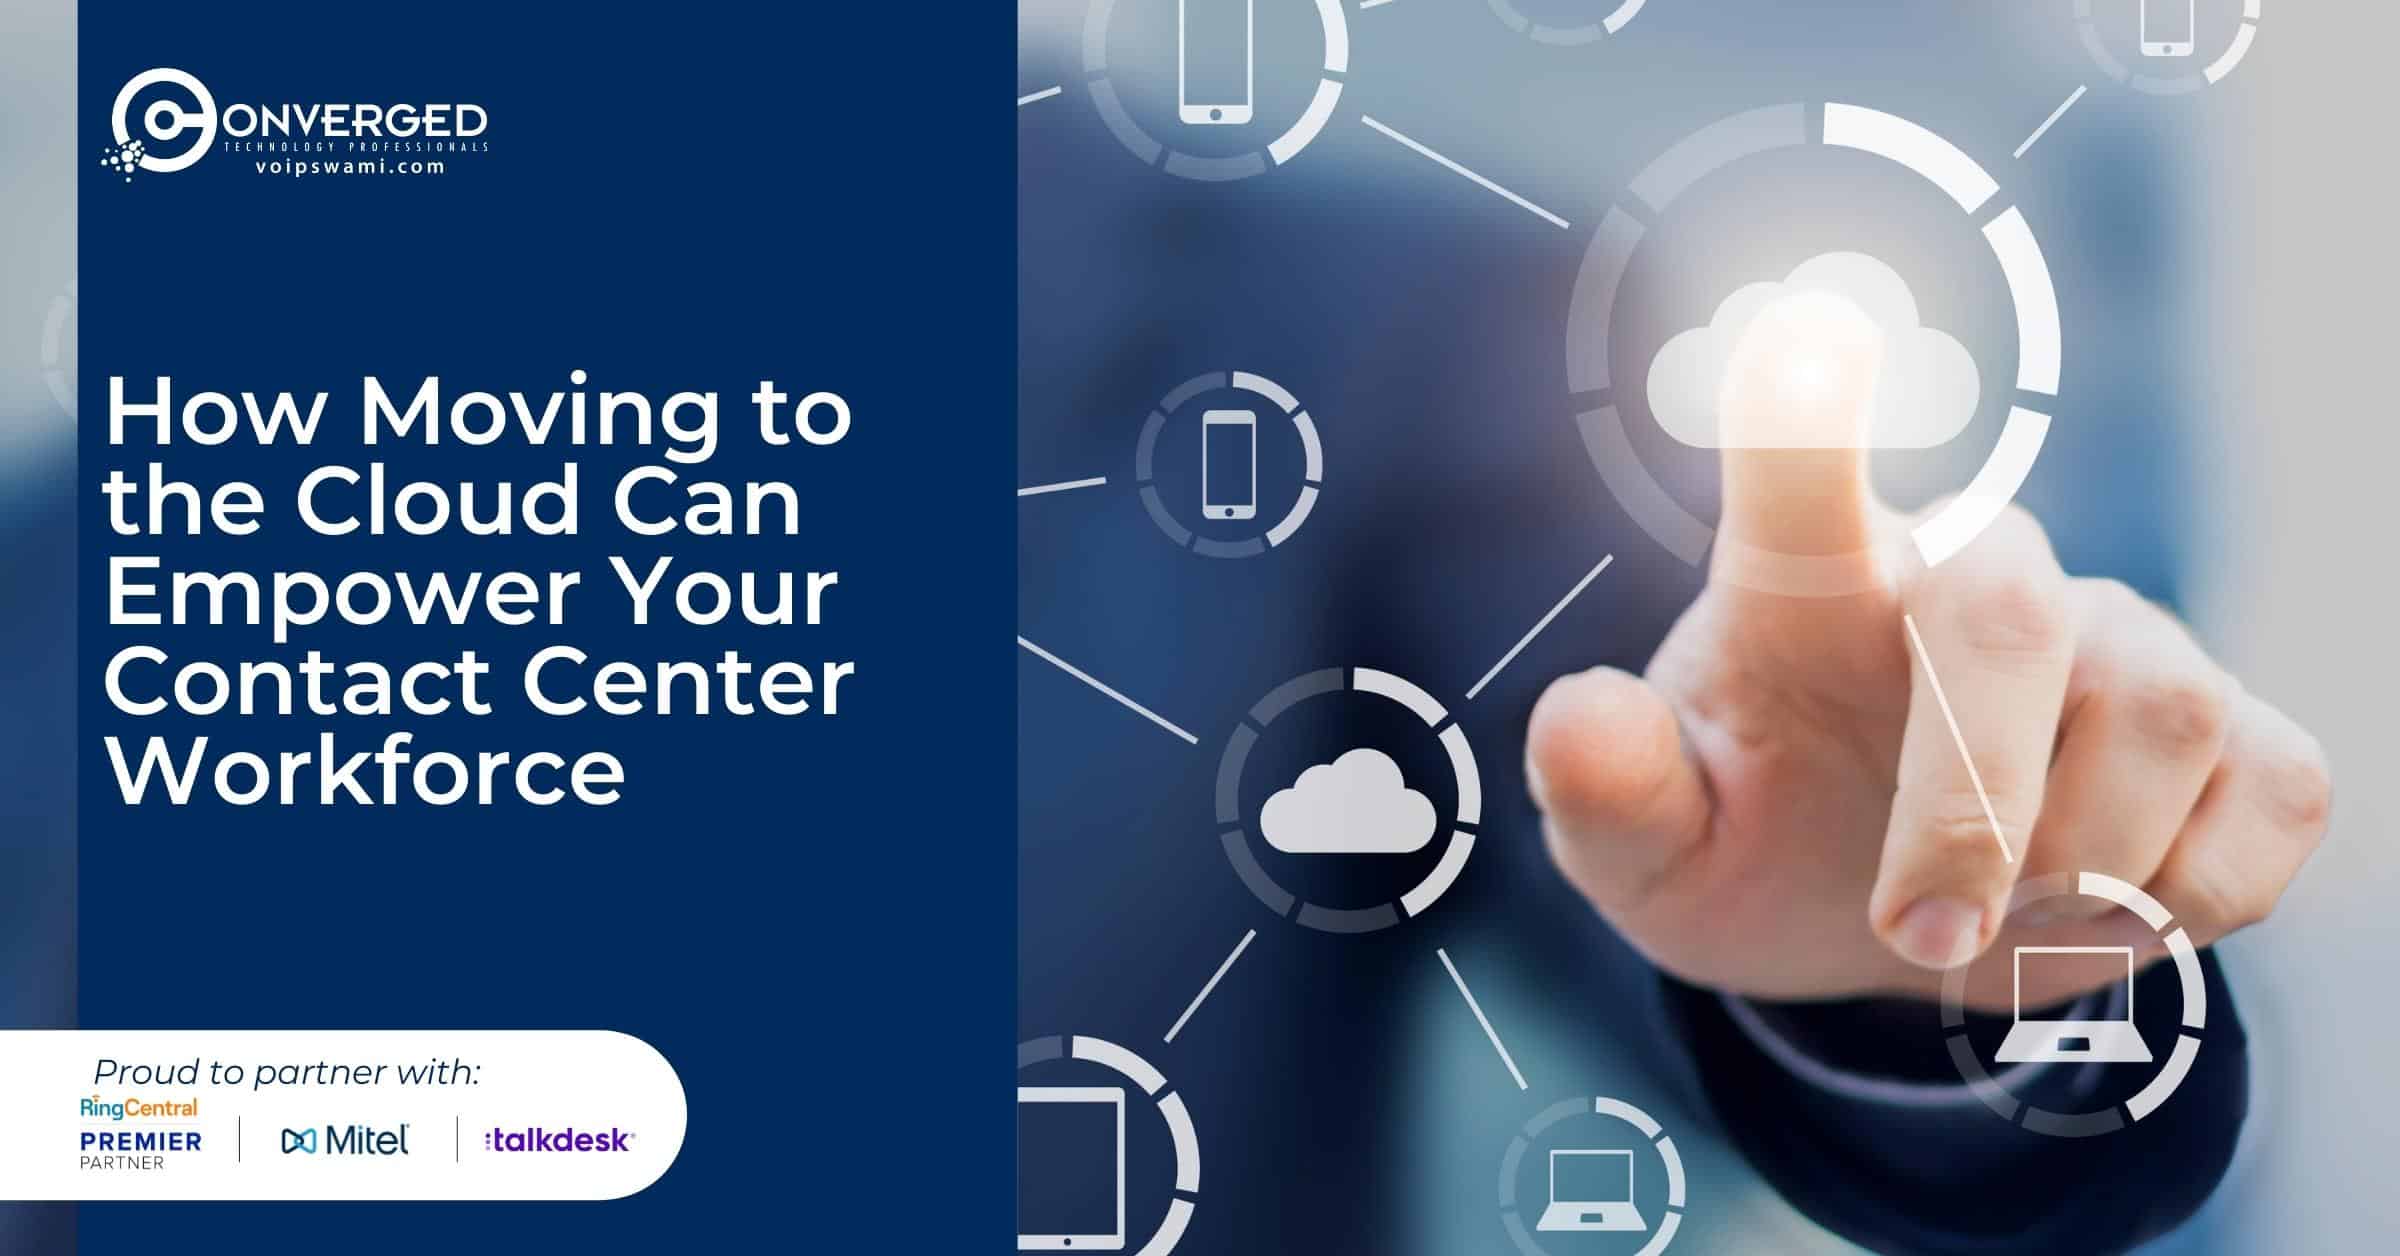 How Moving to the Cloud Can Empower Your Contact Center Workforce